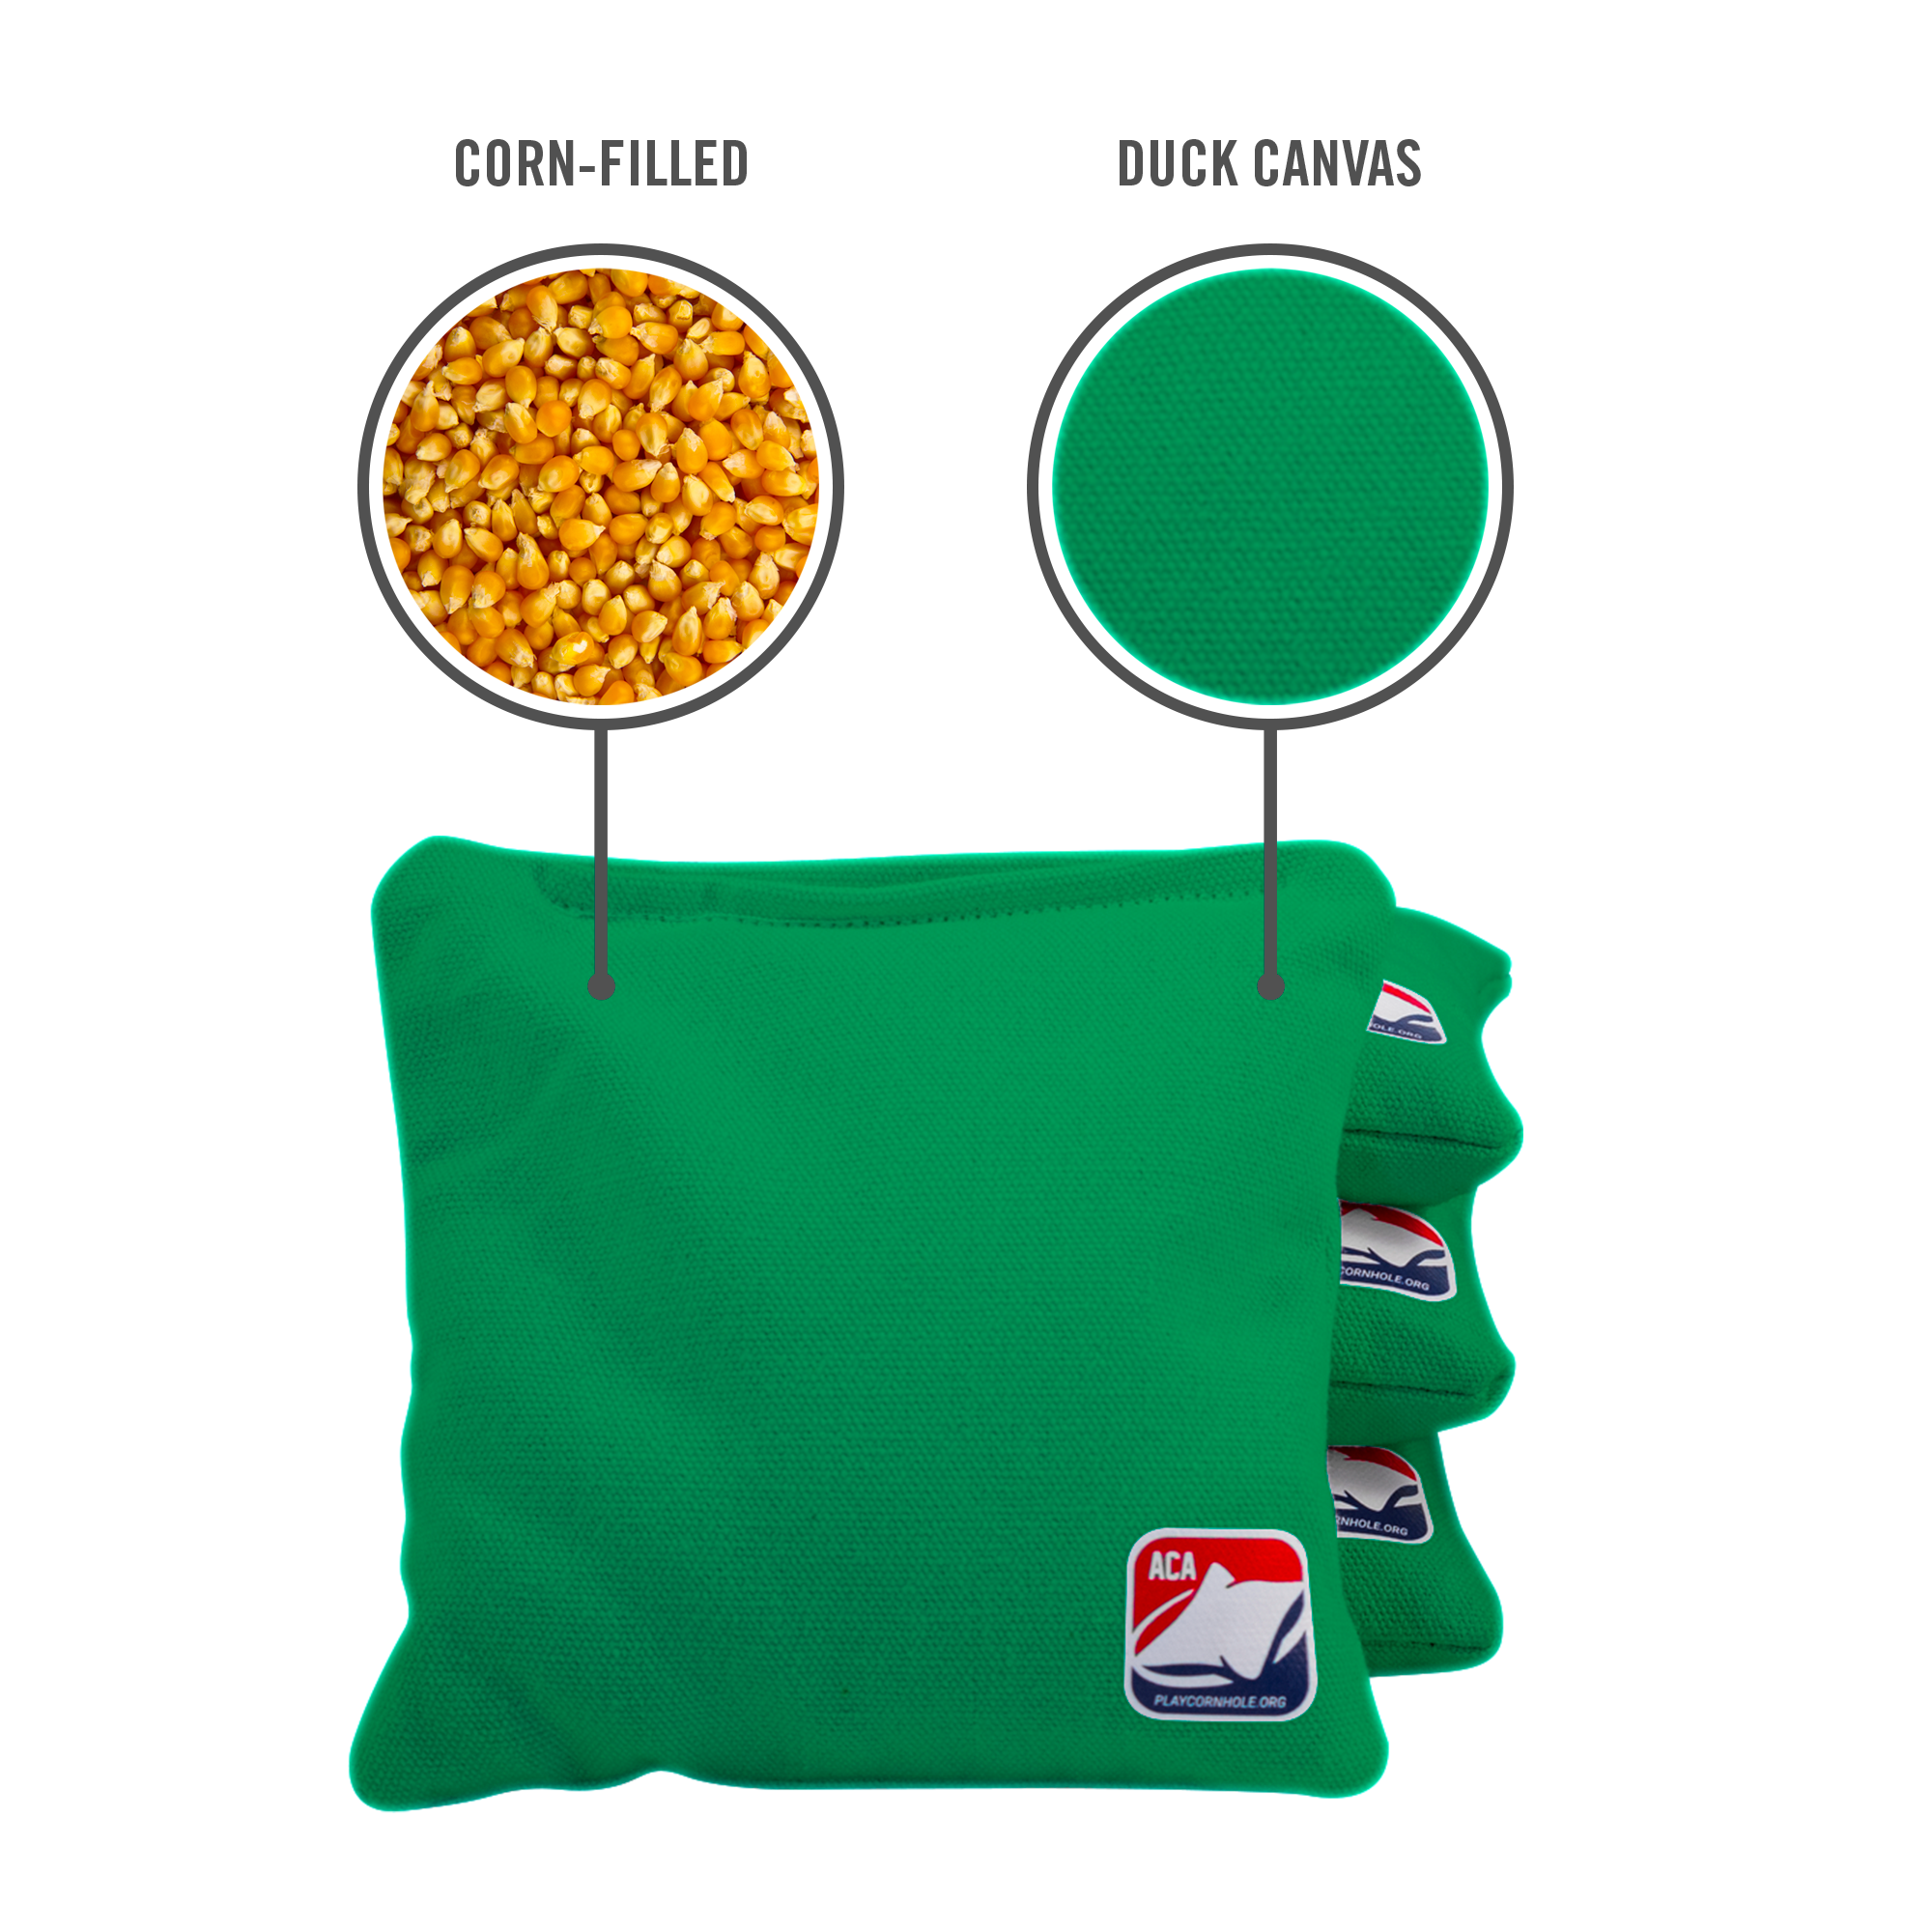 6-in Daily 66 Kelly Green Competition Regulation Cornhole Bags